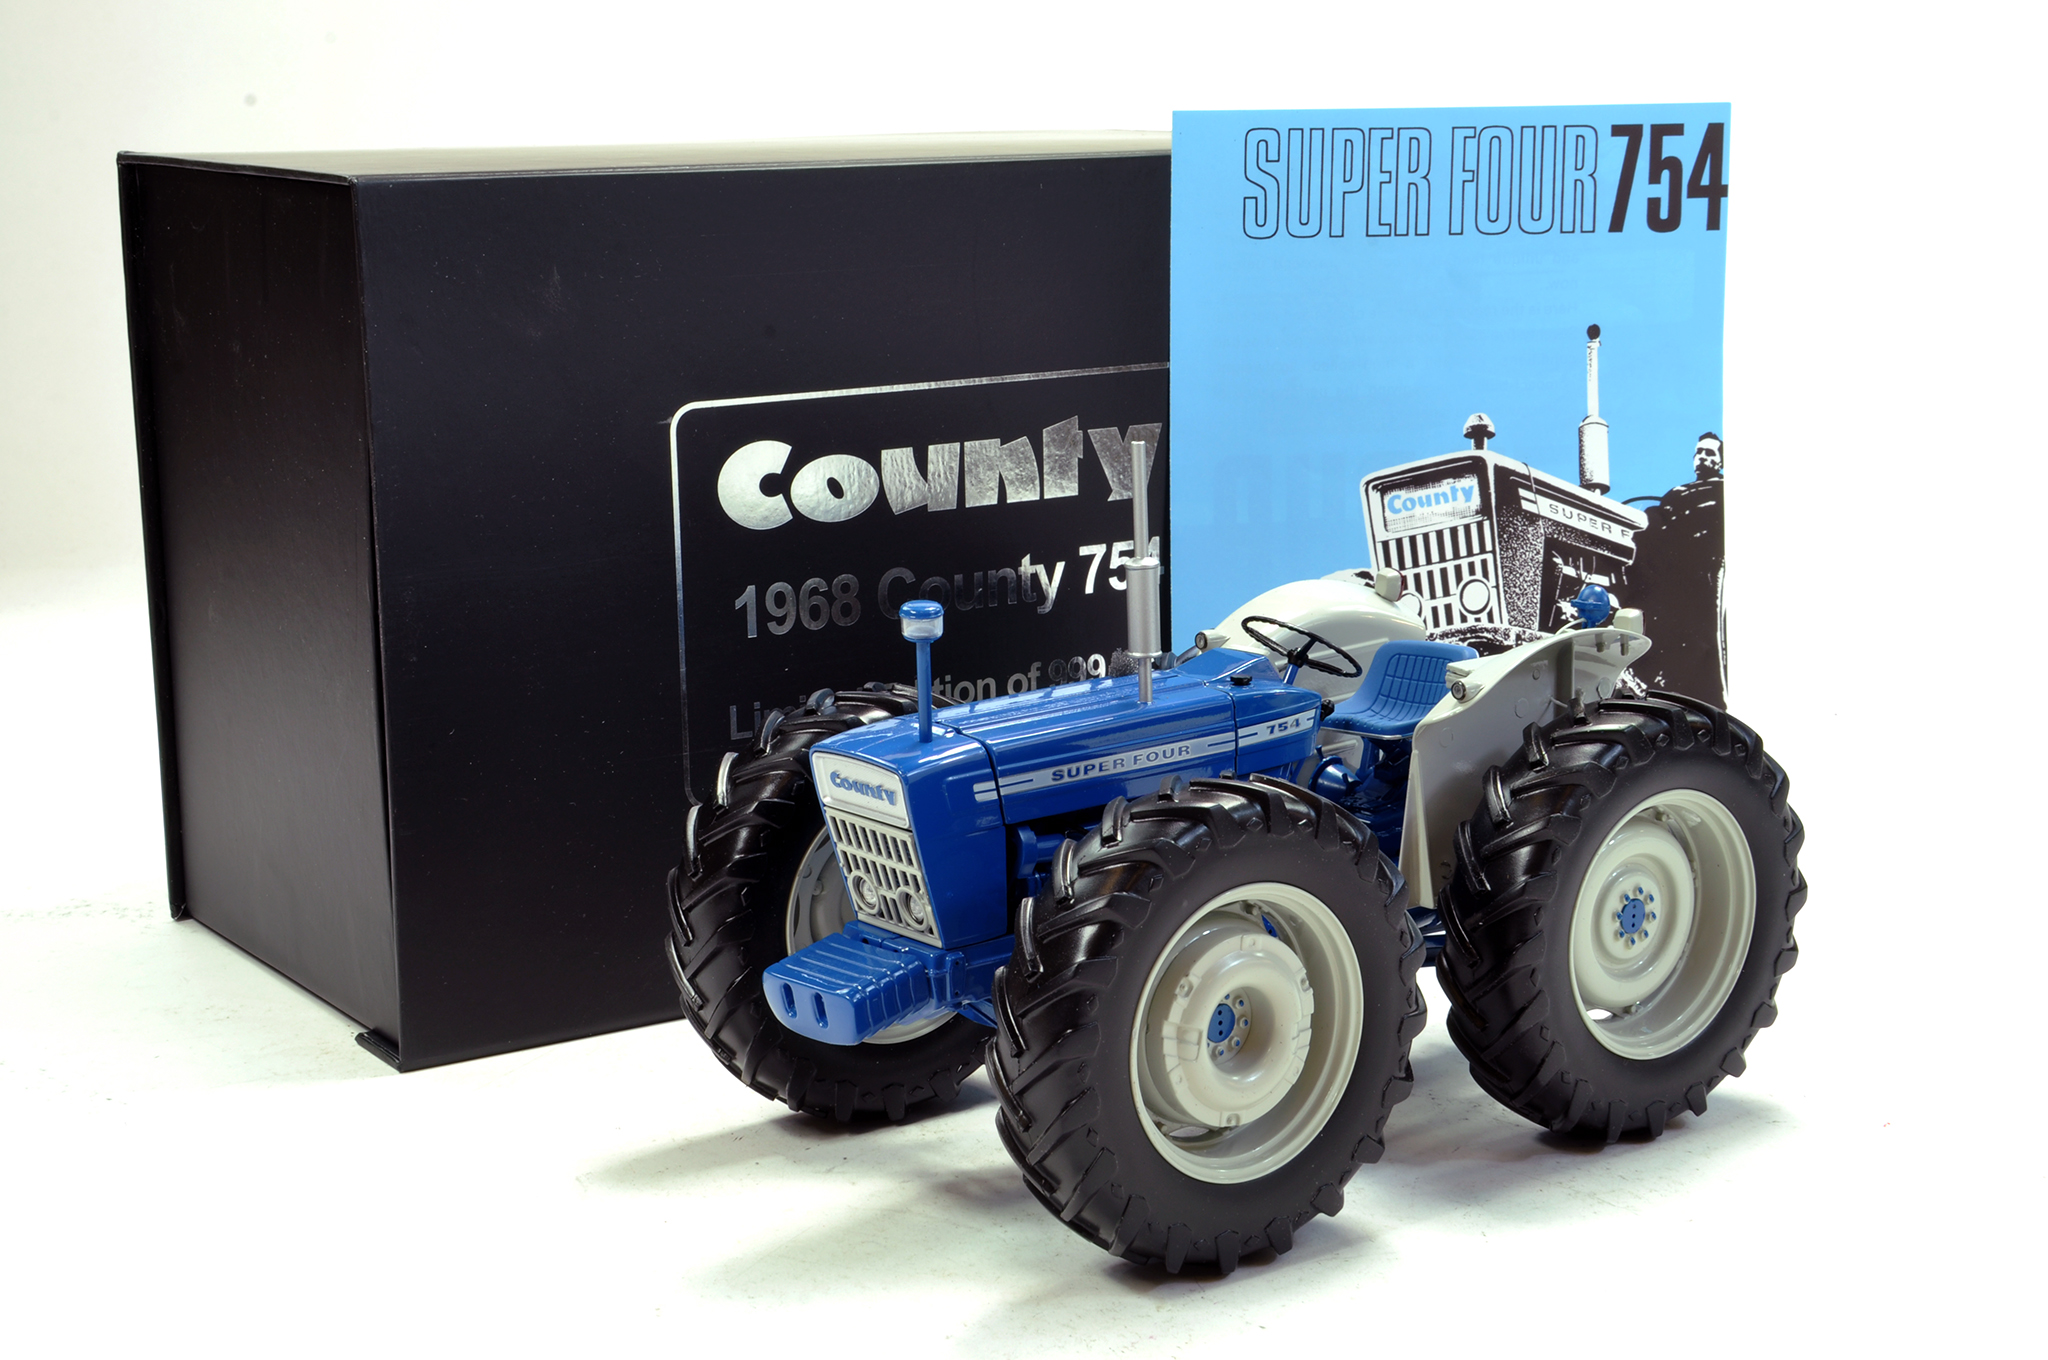 UH 1/16 County 754 Super Four Limited Edition Tractor. Looks to be near mint, likely to have not